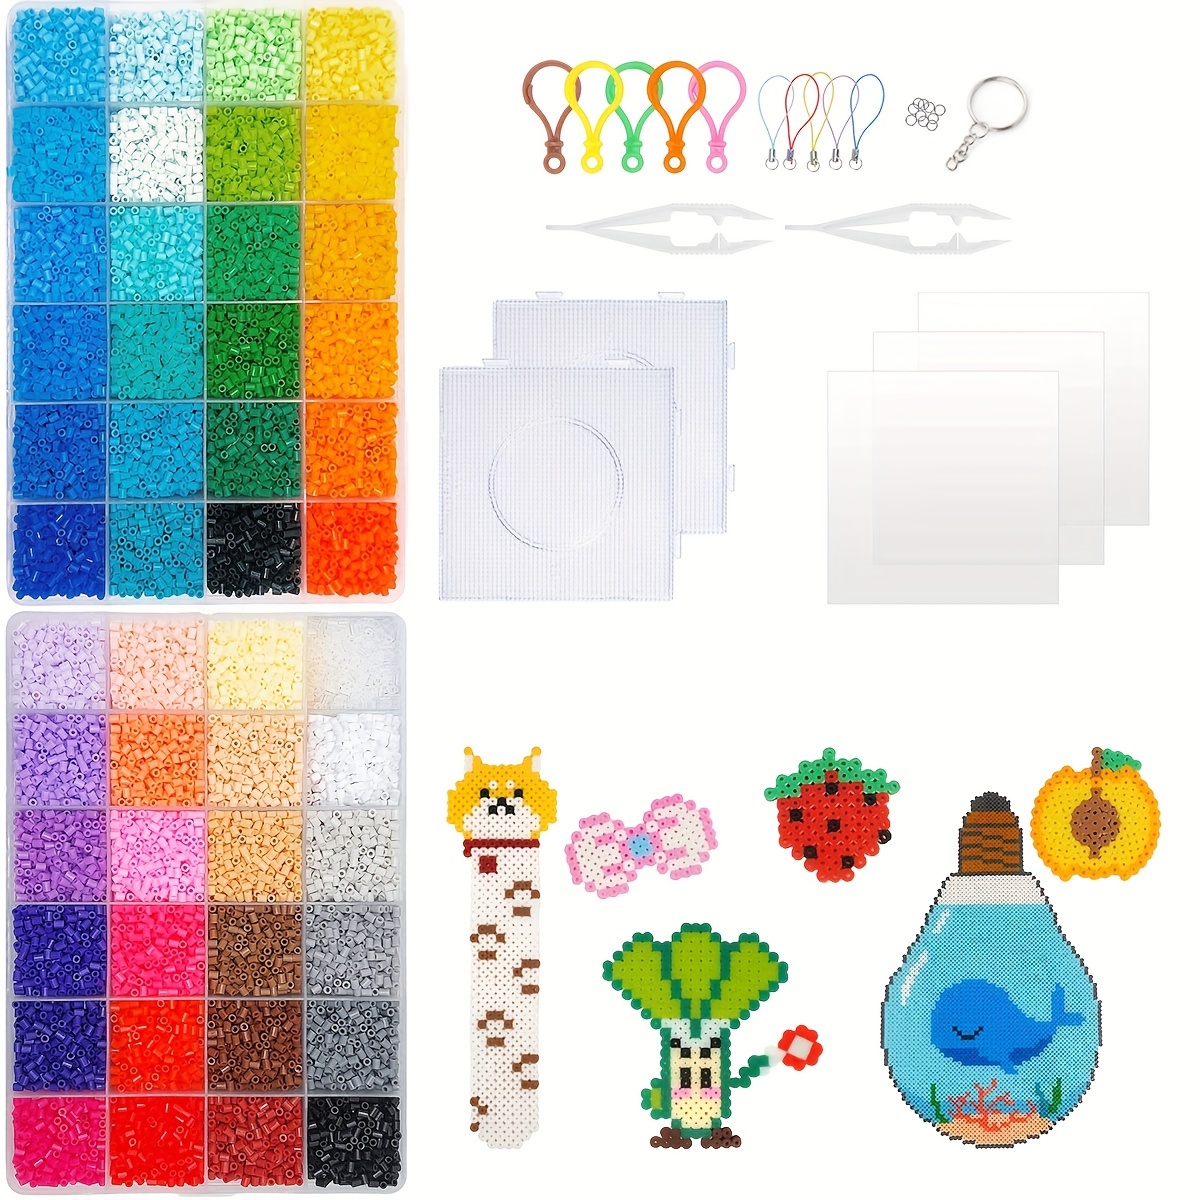 Frcolor Beads Board Bead Pegboard Fuse Pegboards Craft Boards Kids Plastic  Round Mini Square Iron Hexagon Diy Peg Tools 